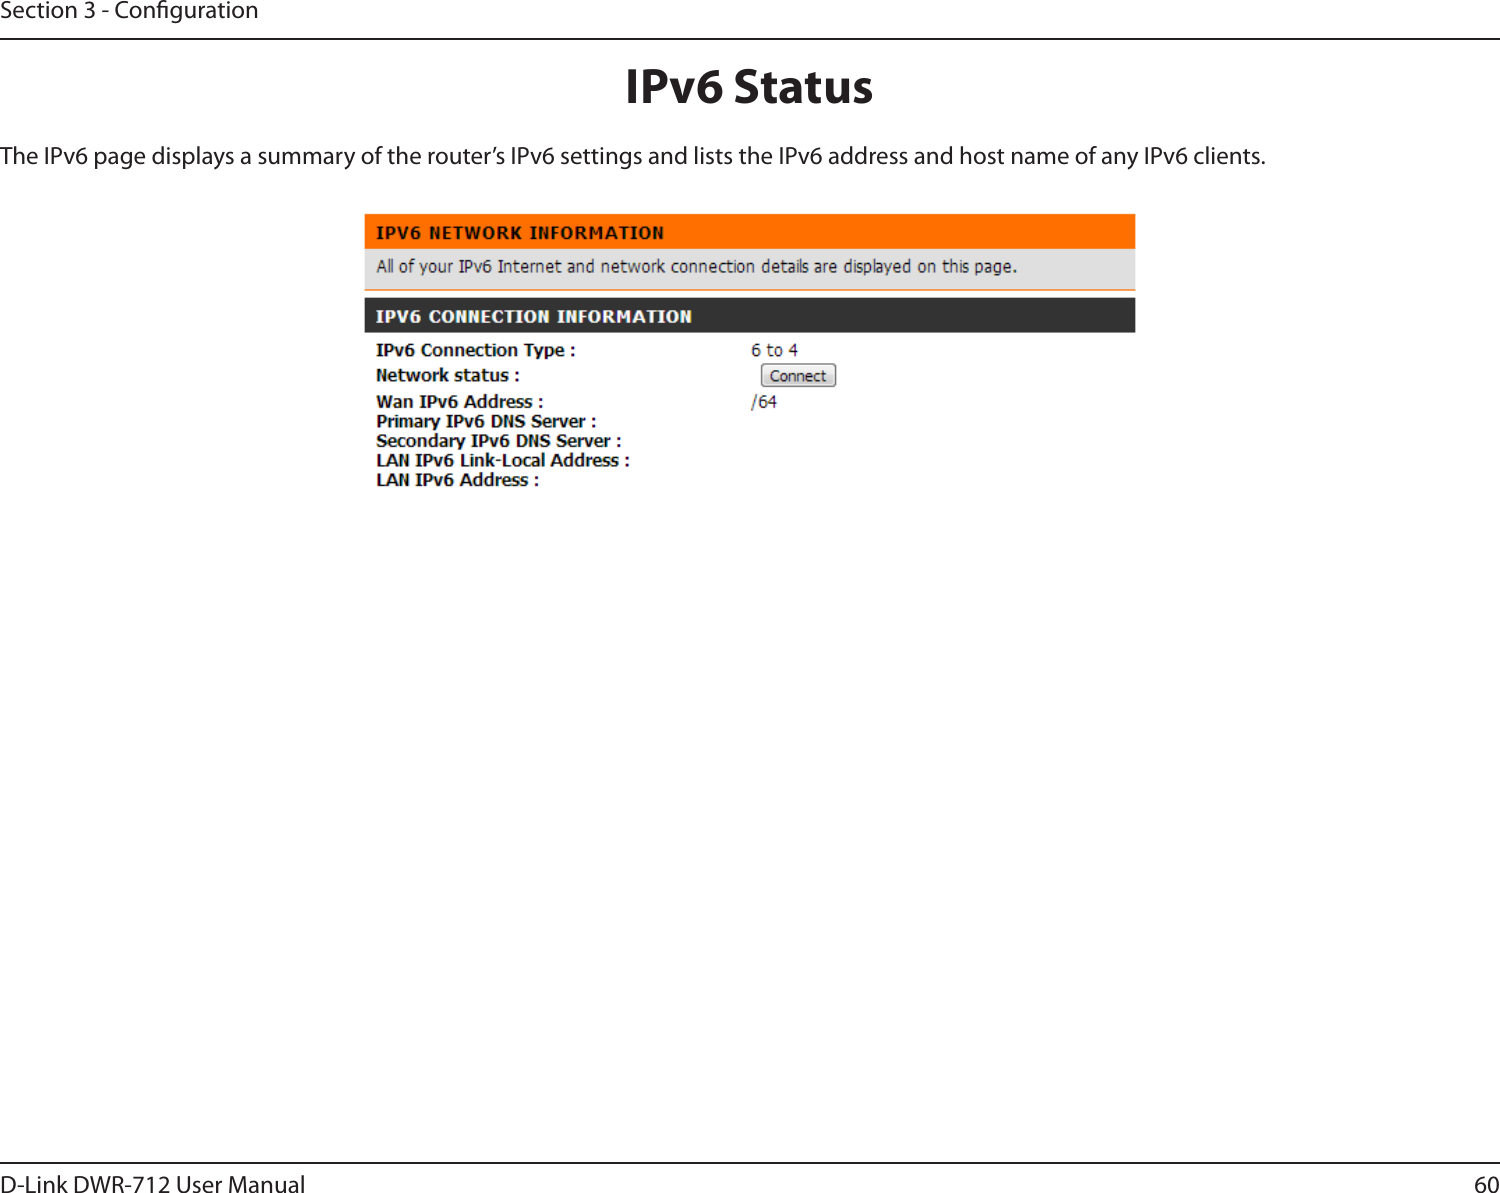 60D-Link DWR-712 User ManualSection 3 - CongurationIPv6 StatusThe IPv6 page displays a summary of the router’s IPv6 settings and lists the IPv6 address and host name of any IPv6 clients.